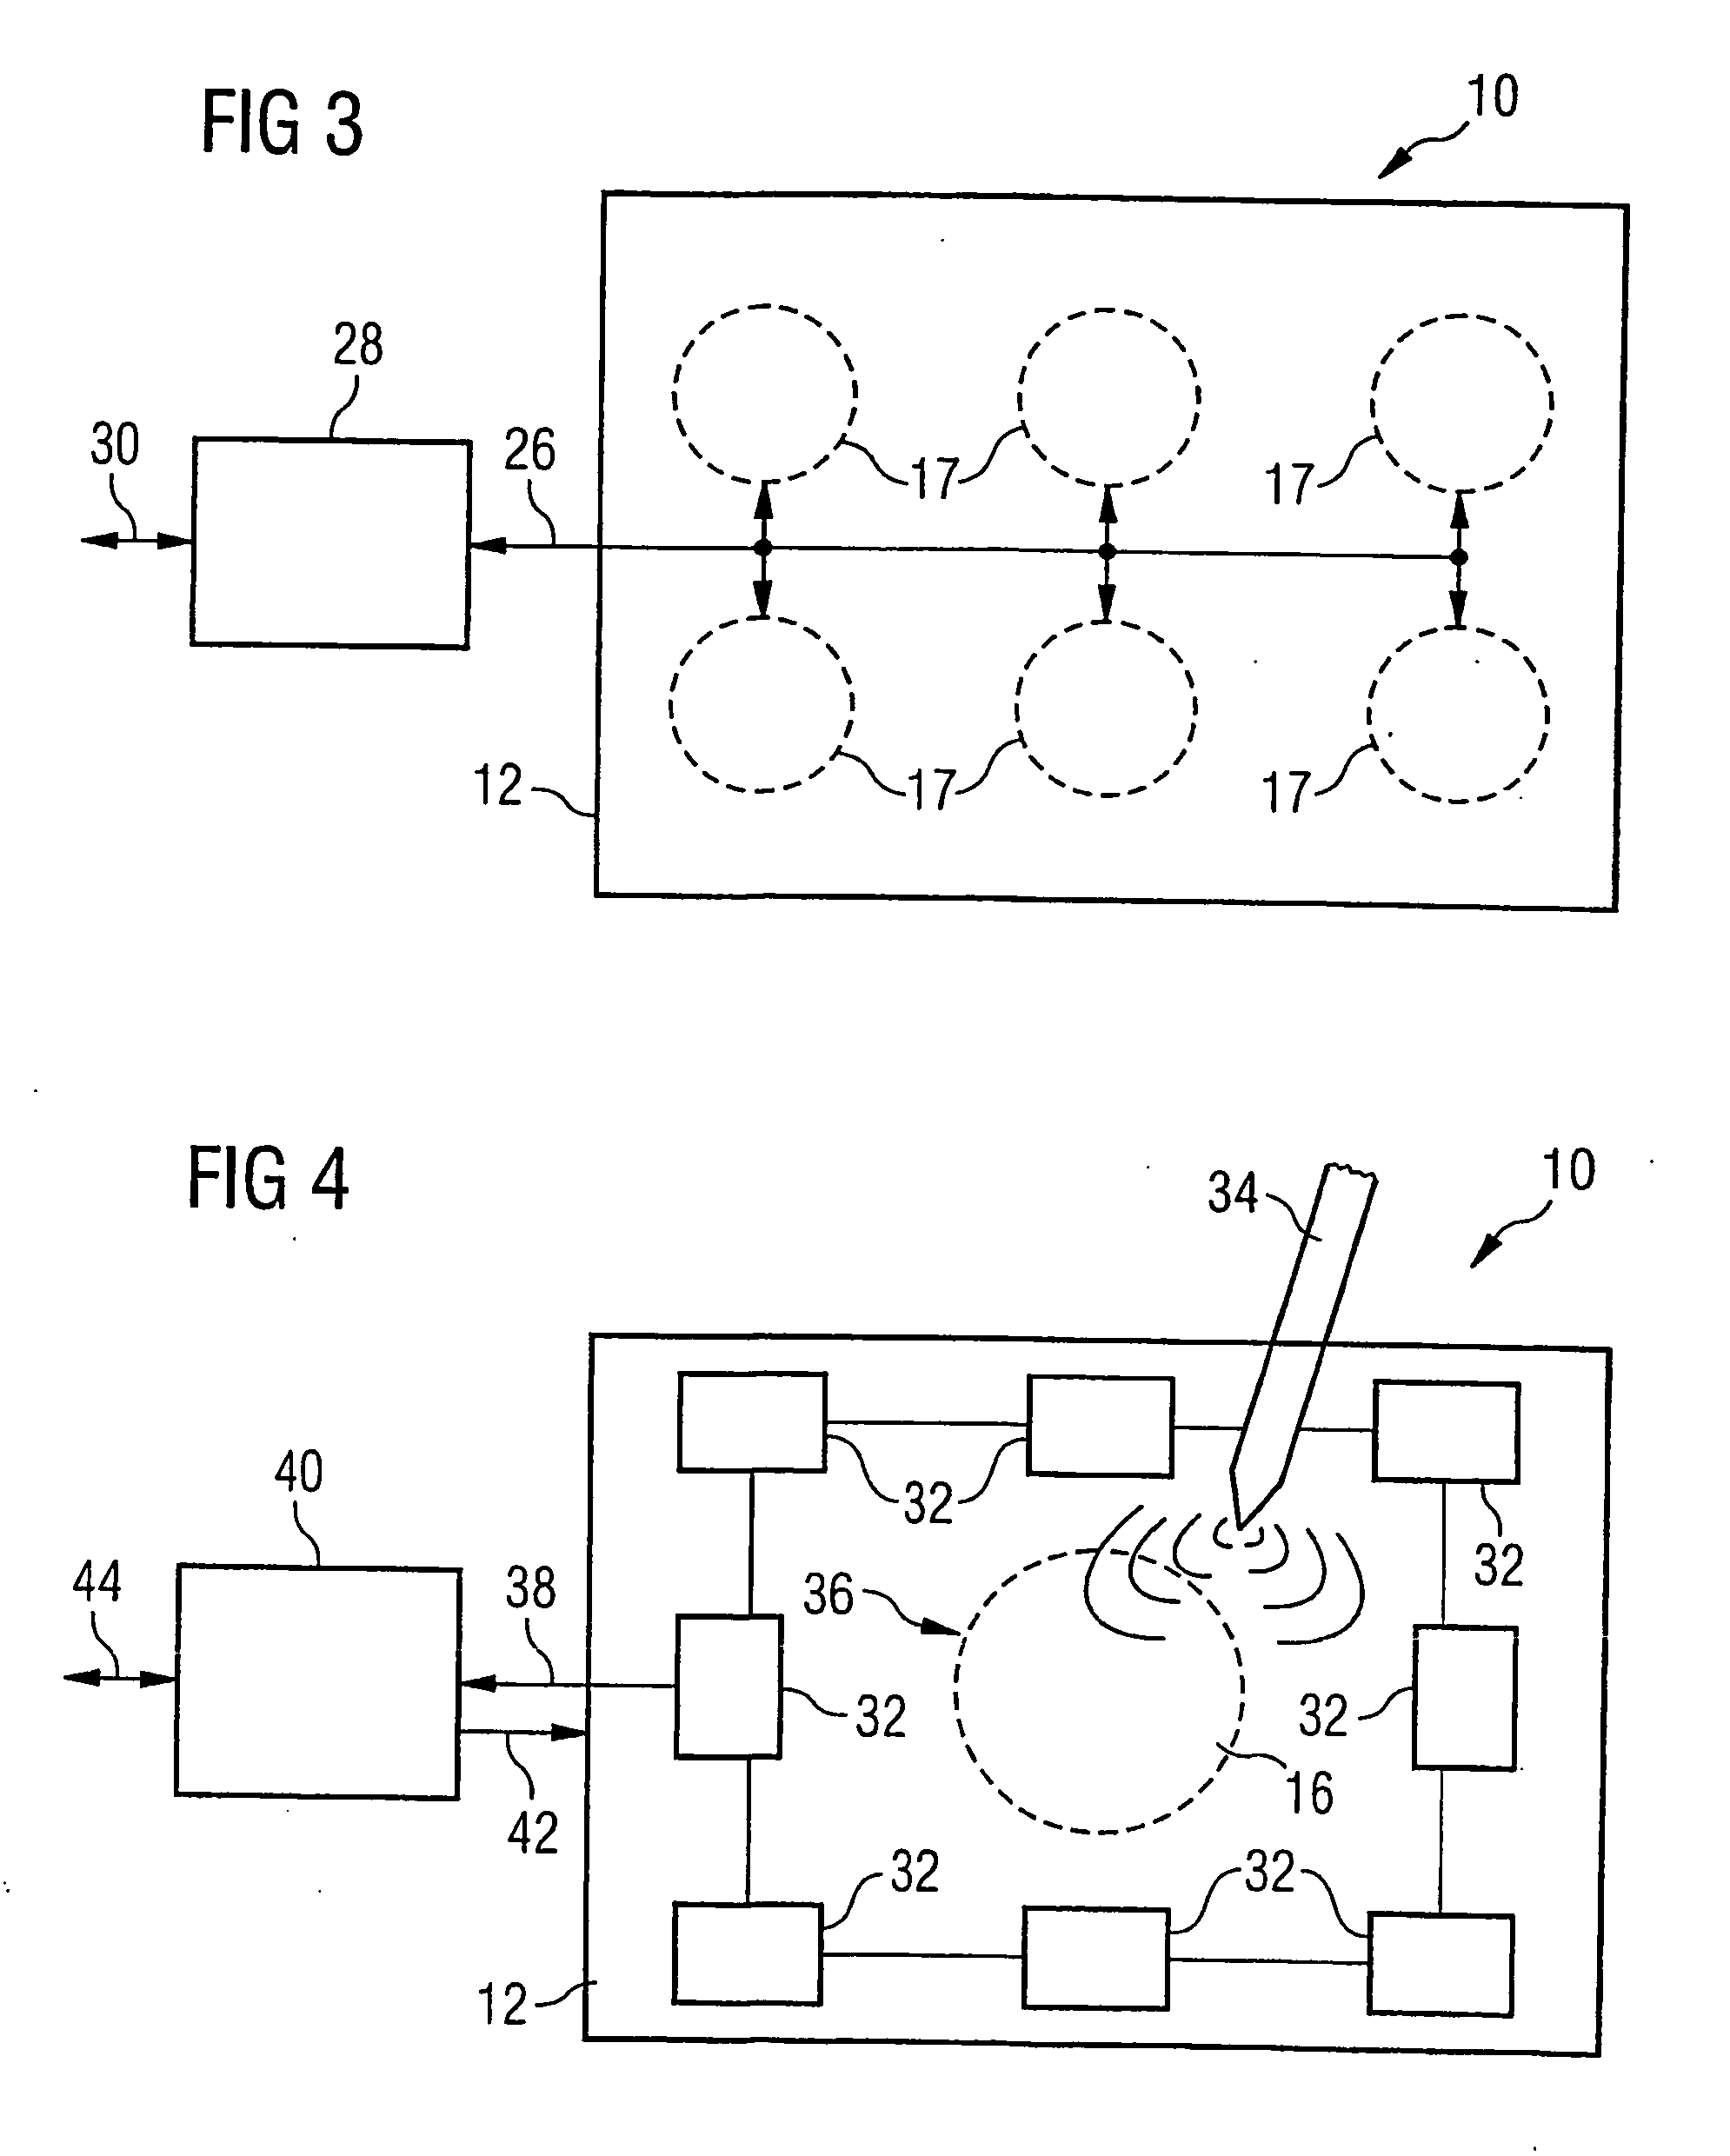 Display comprising and integrated loudspeaker and method for recognizing the touching of the display